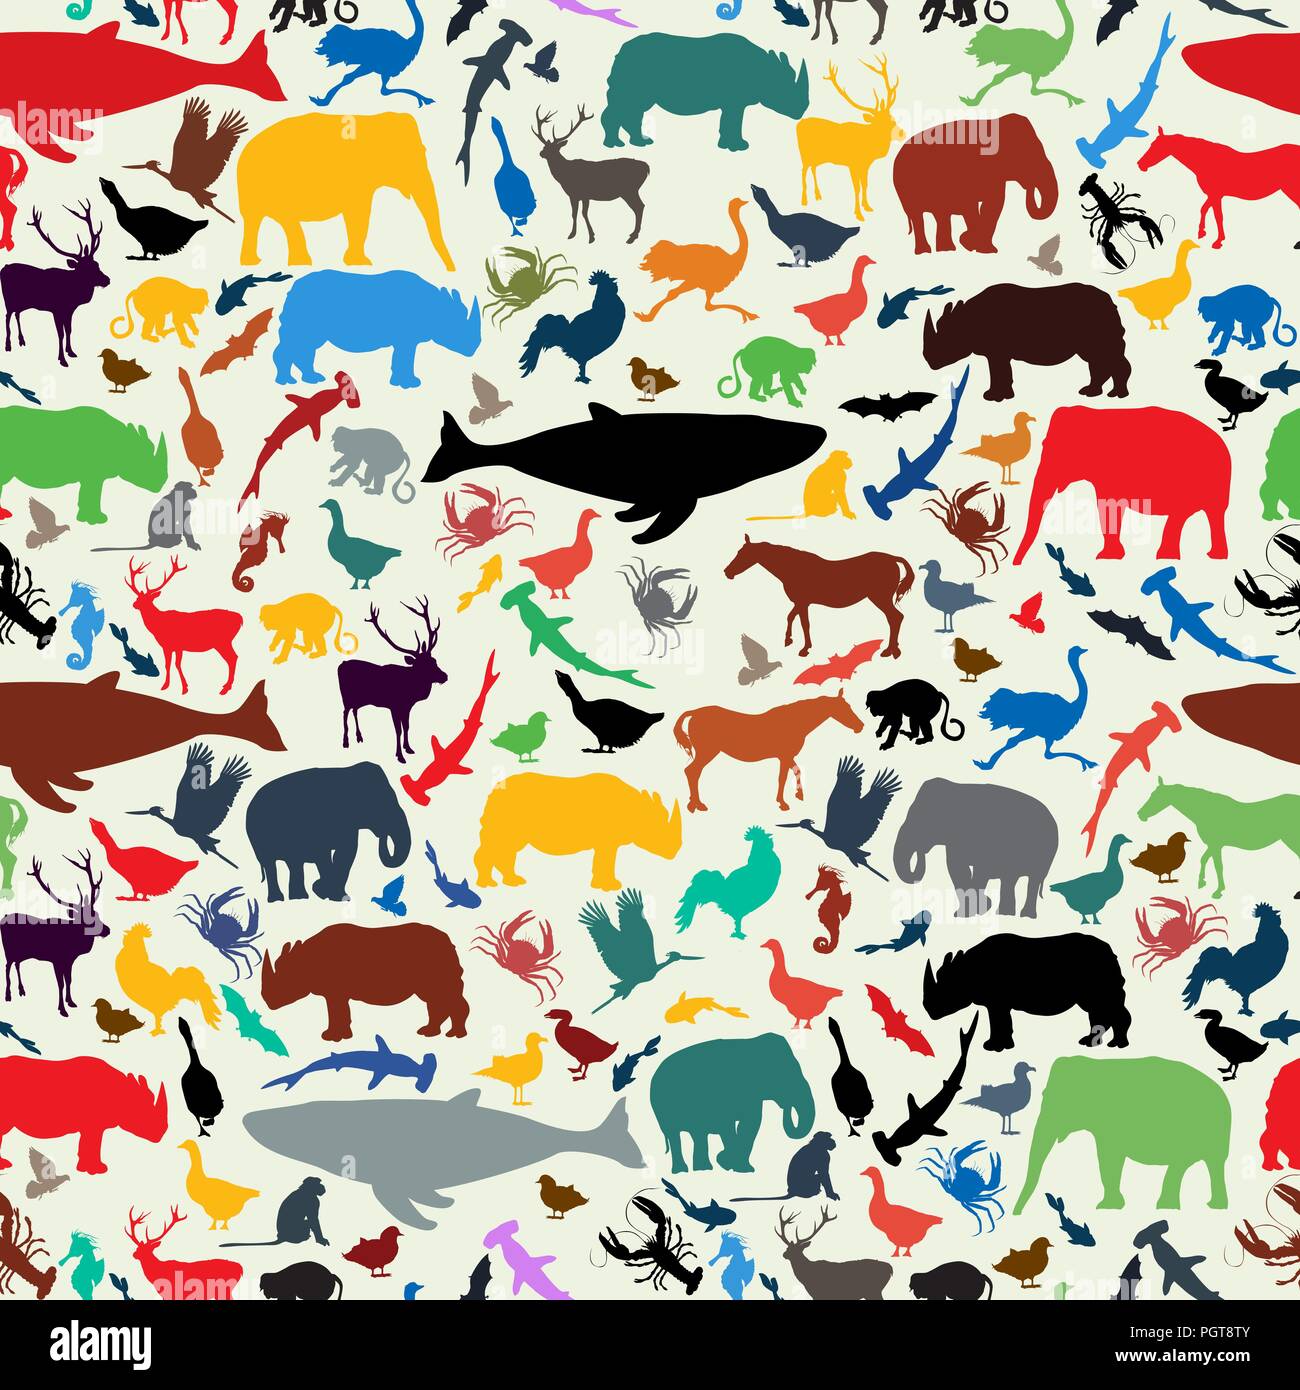 Wild life animal silhouettes  seamless pattern design in retro style colors Stock Vector